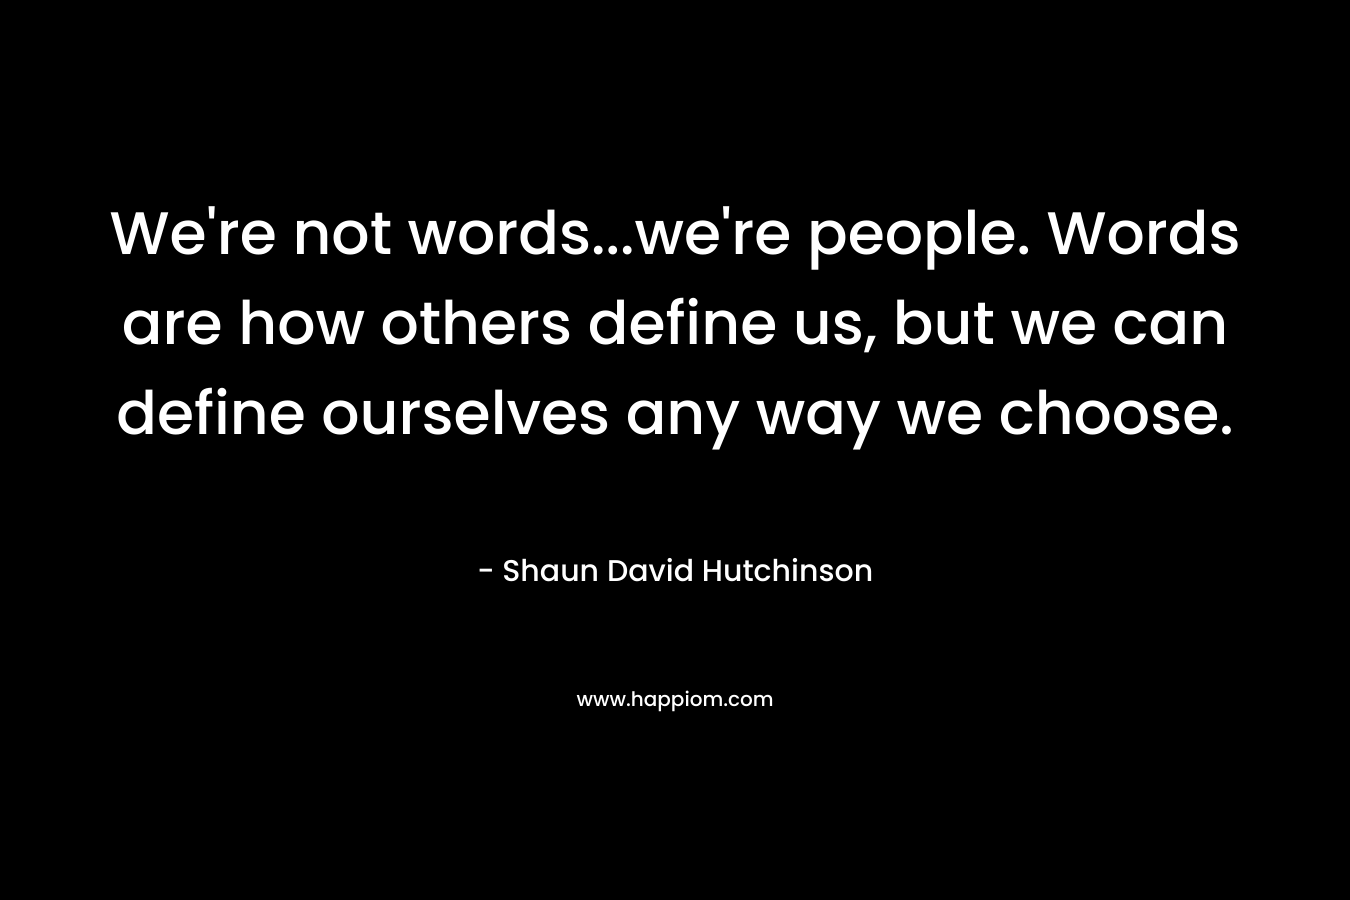 We’re not words…we’re people. Words are how others define us, but we can define ourselves any way we choose. – Shaun David Hutchinson